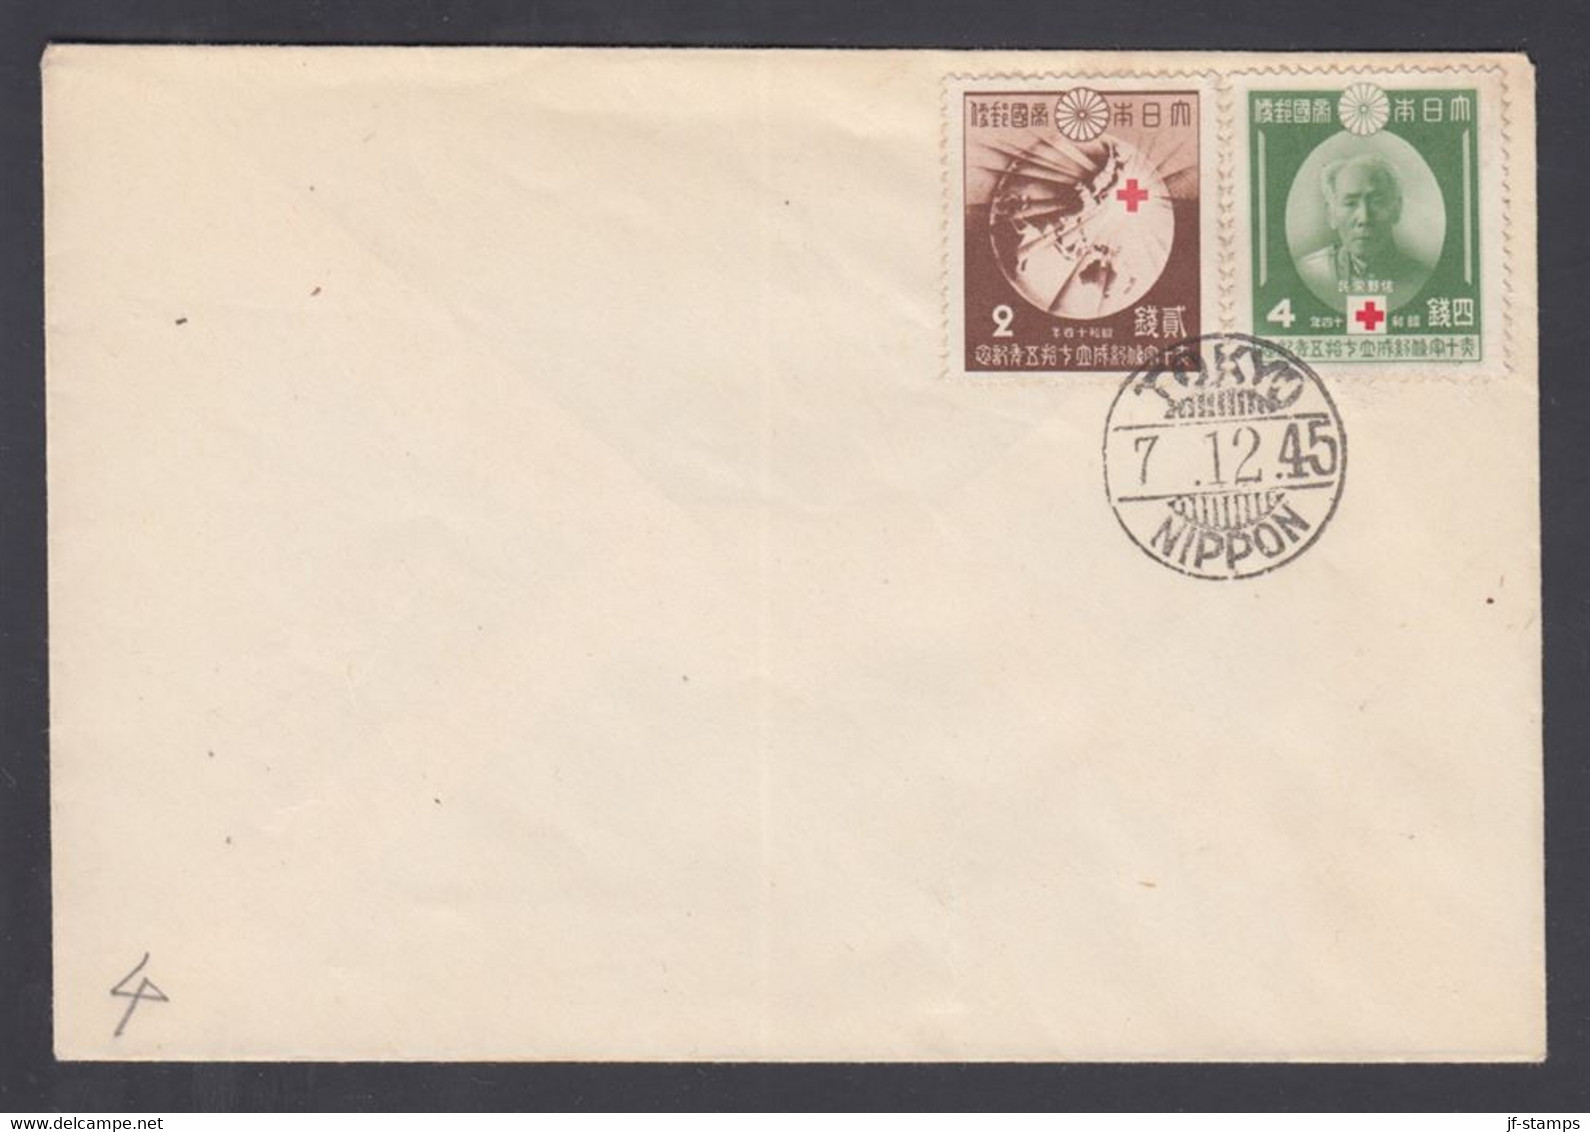 1945. JAPAN  12 + 4 RED CROSS Cancelled TOKIO NIPPON 7.12.45. (Michel 284-285) - JF367904 - Storia Postale